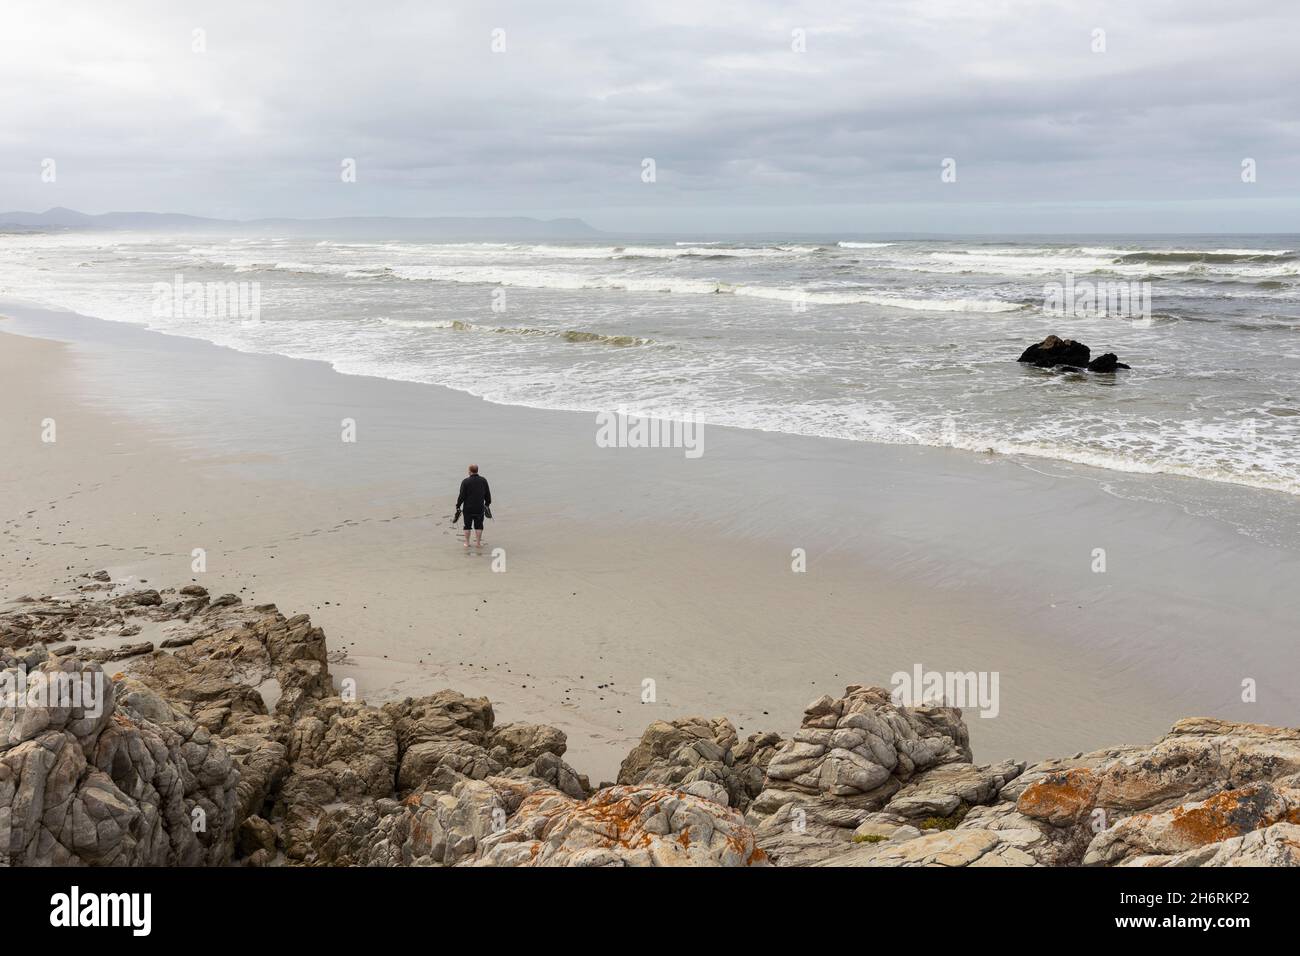 A man walking across sand to the water's edge on a beach, overcast day and surf waves breaking on shore. Stock Photo